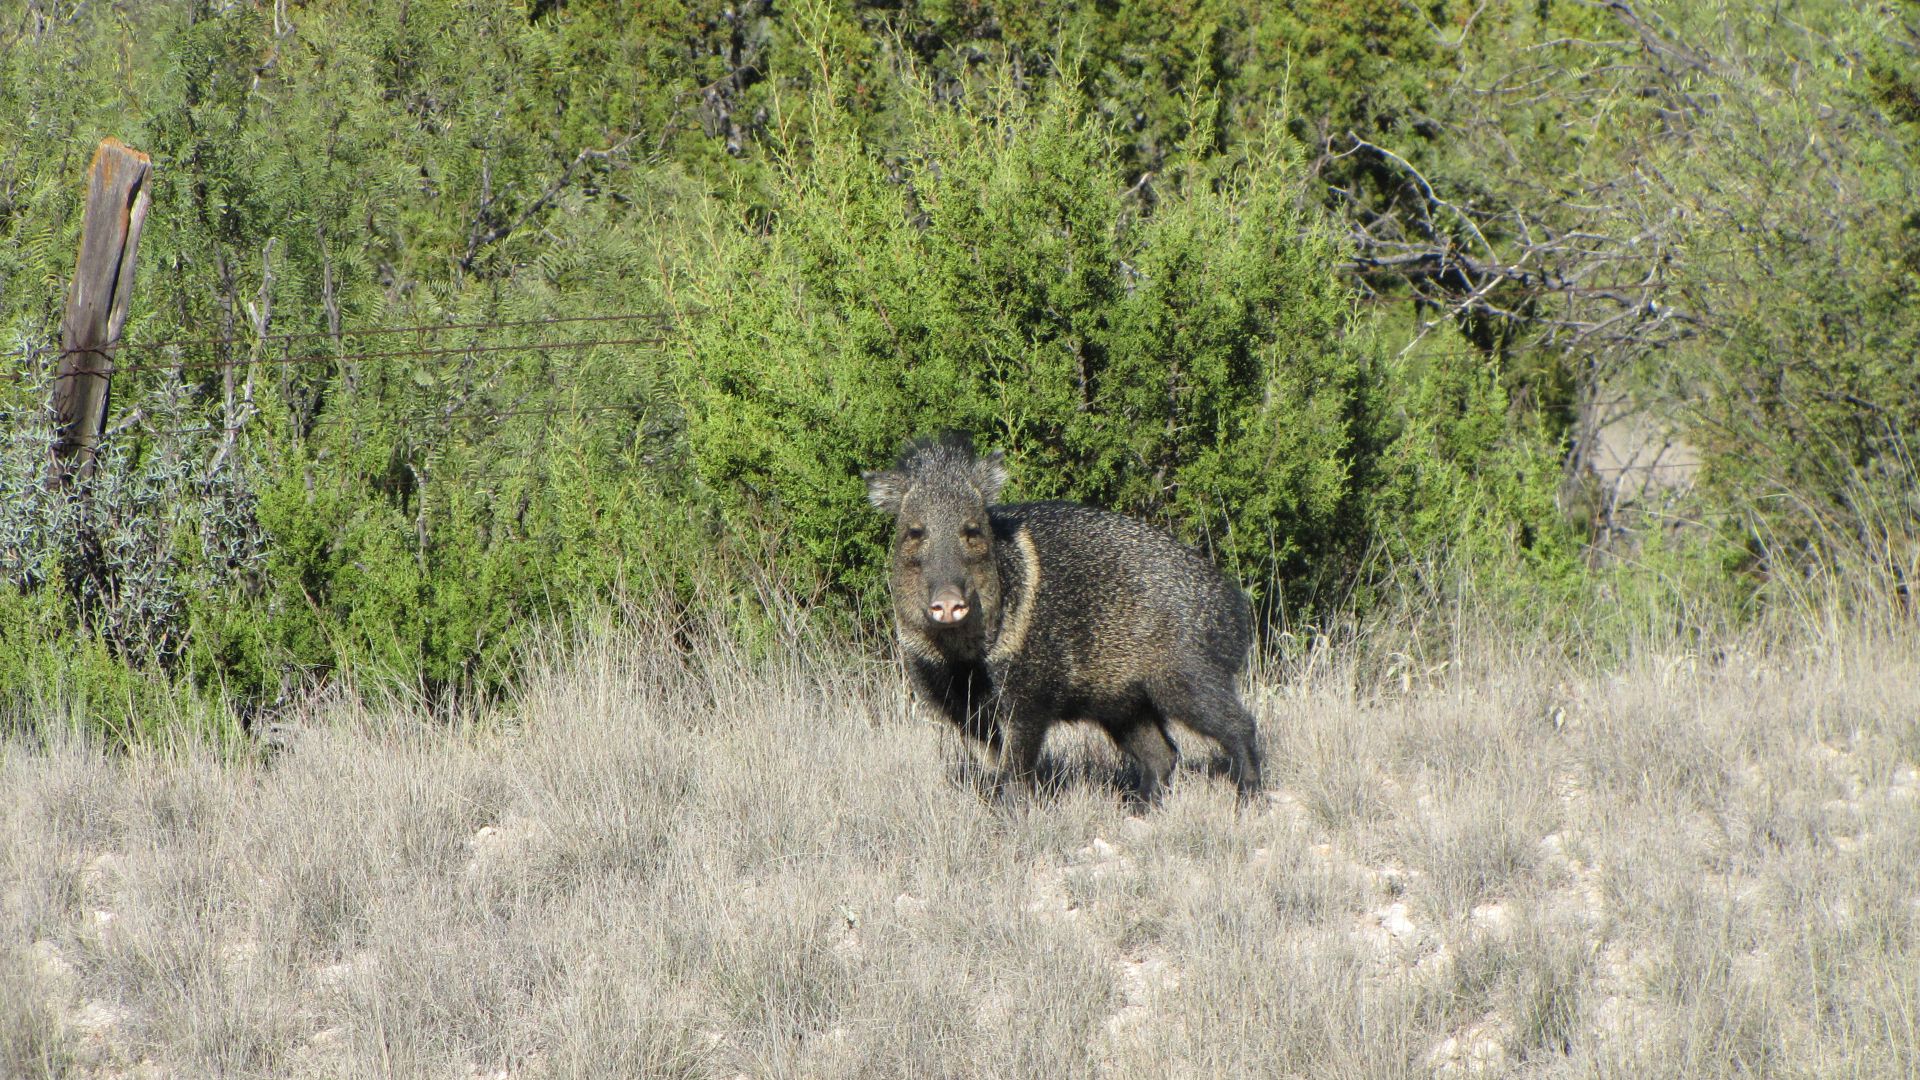 Nr Sanderson, TX, USA - this chap gave the distinct impression that he was going to charge until I rode off (he was protecting his family who are in the bushes - they`re "Javelinas")